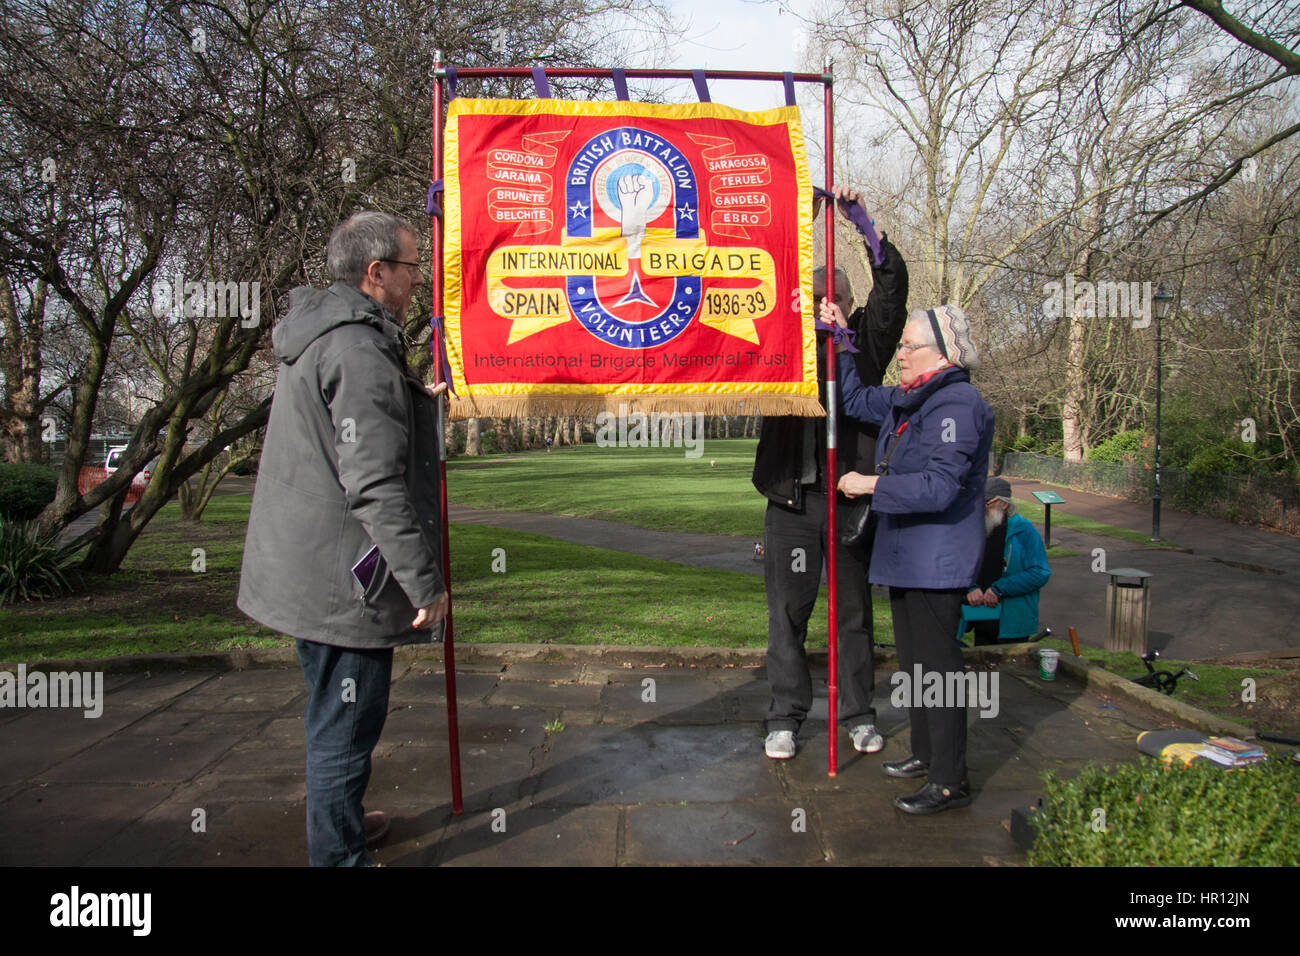 London, UK. 26th Feb, 2017. A service of commemoration at Bishop's Park in Fulham including a wreath laying ceremony and prayers to commemorate the 80th anniversary of the Battle of Jarama which was fought by British volunteers of the International Brigage during the Spanish civil war against fascism Credit: amer ghazzal/Alamy Live News Stock Photo